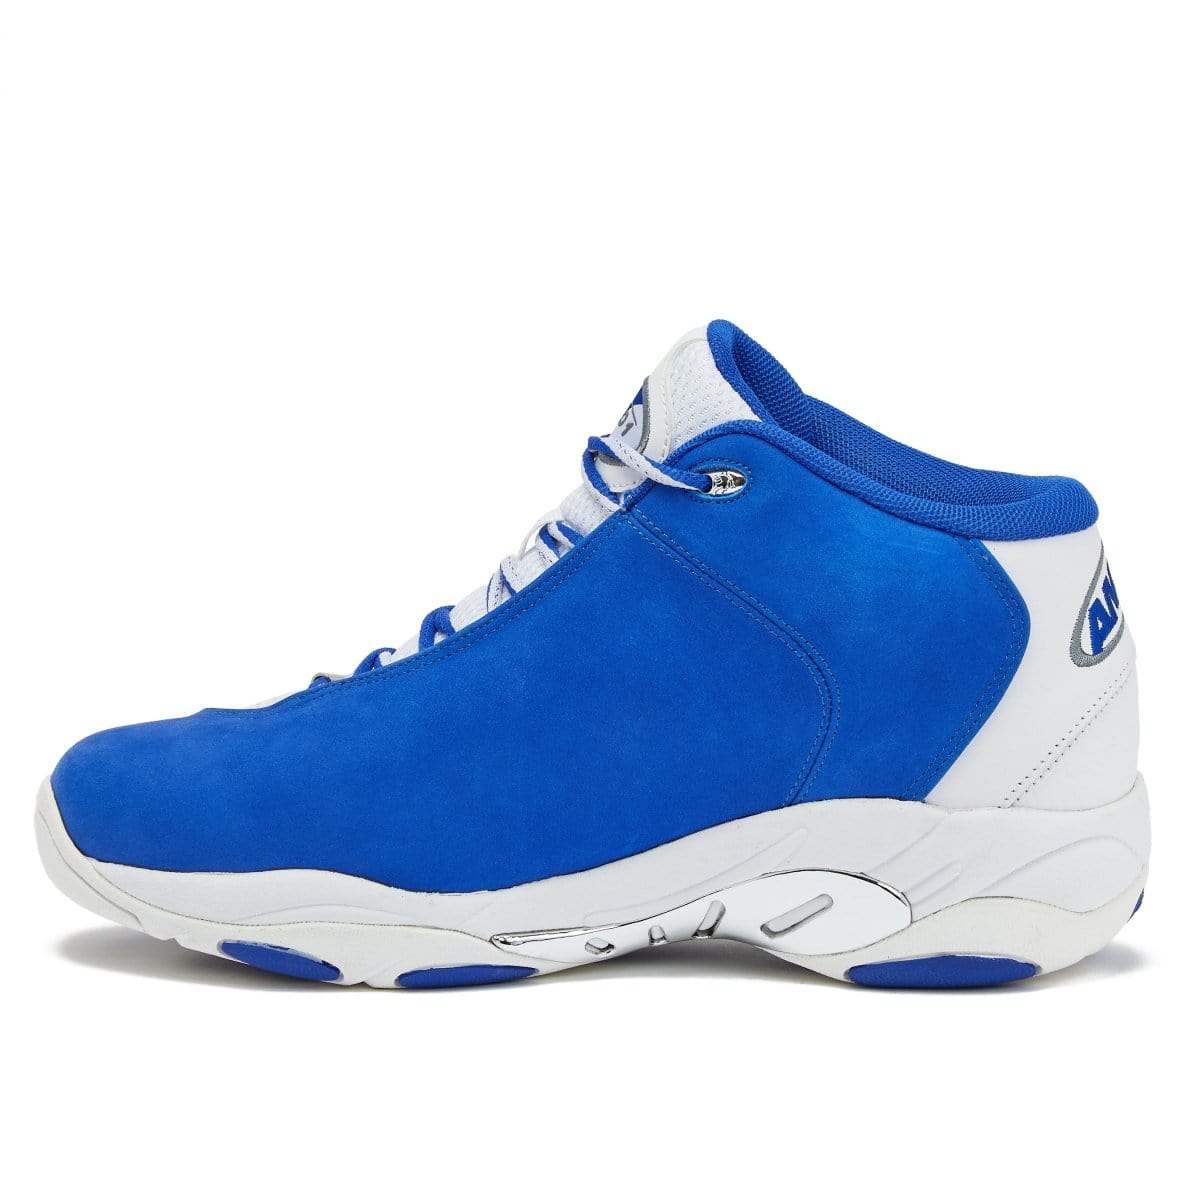 AND-1 AND-1 MEN'S TAI CHI WHITE/BLUE BASKETBALL SHOES - INSPORT